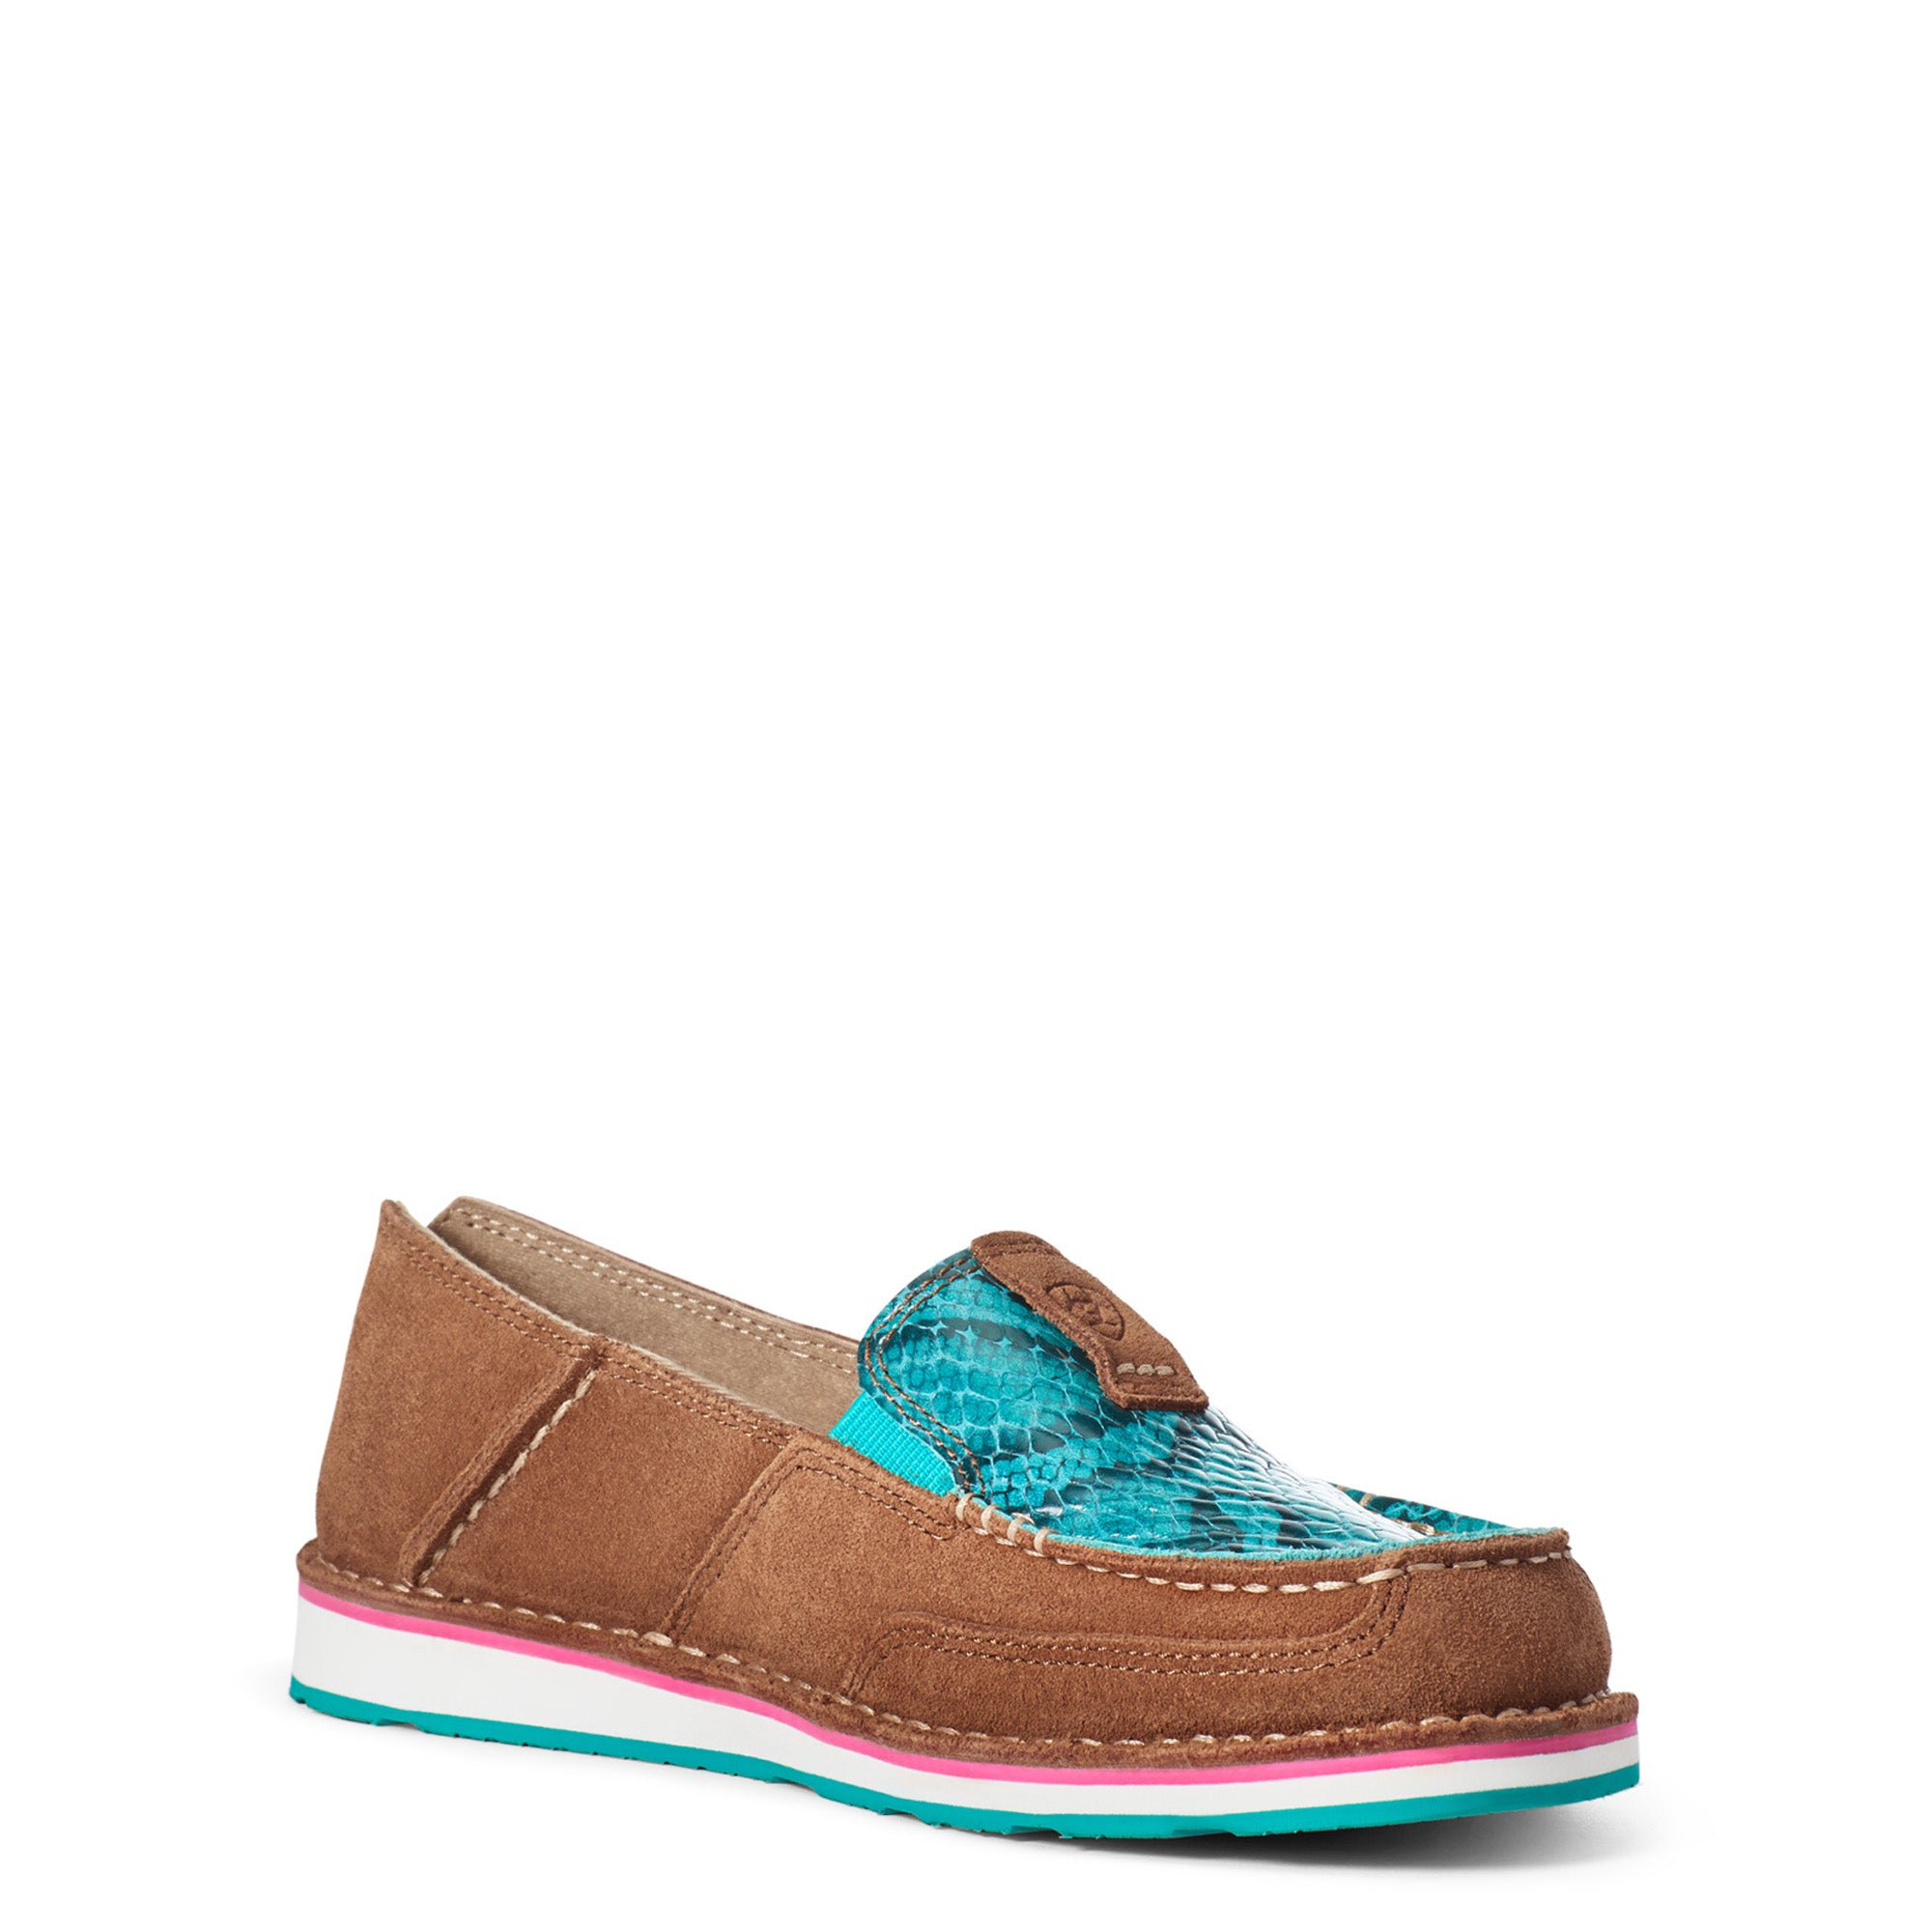 Ariat Suede Turquoise Snake Print Cruiser